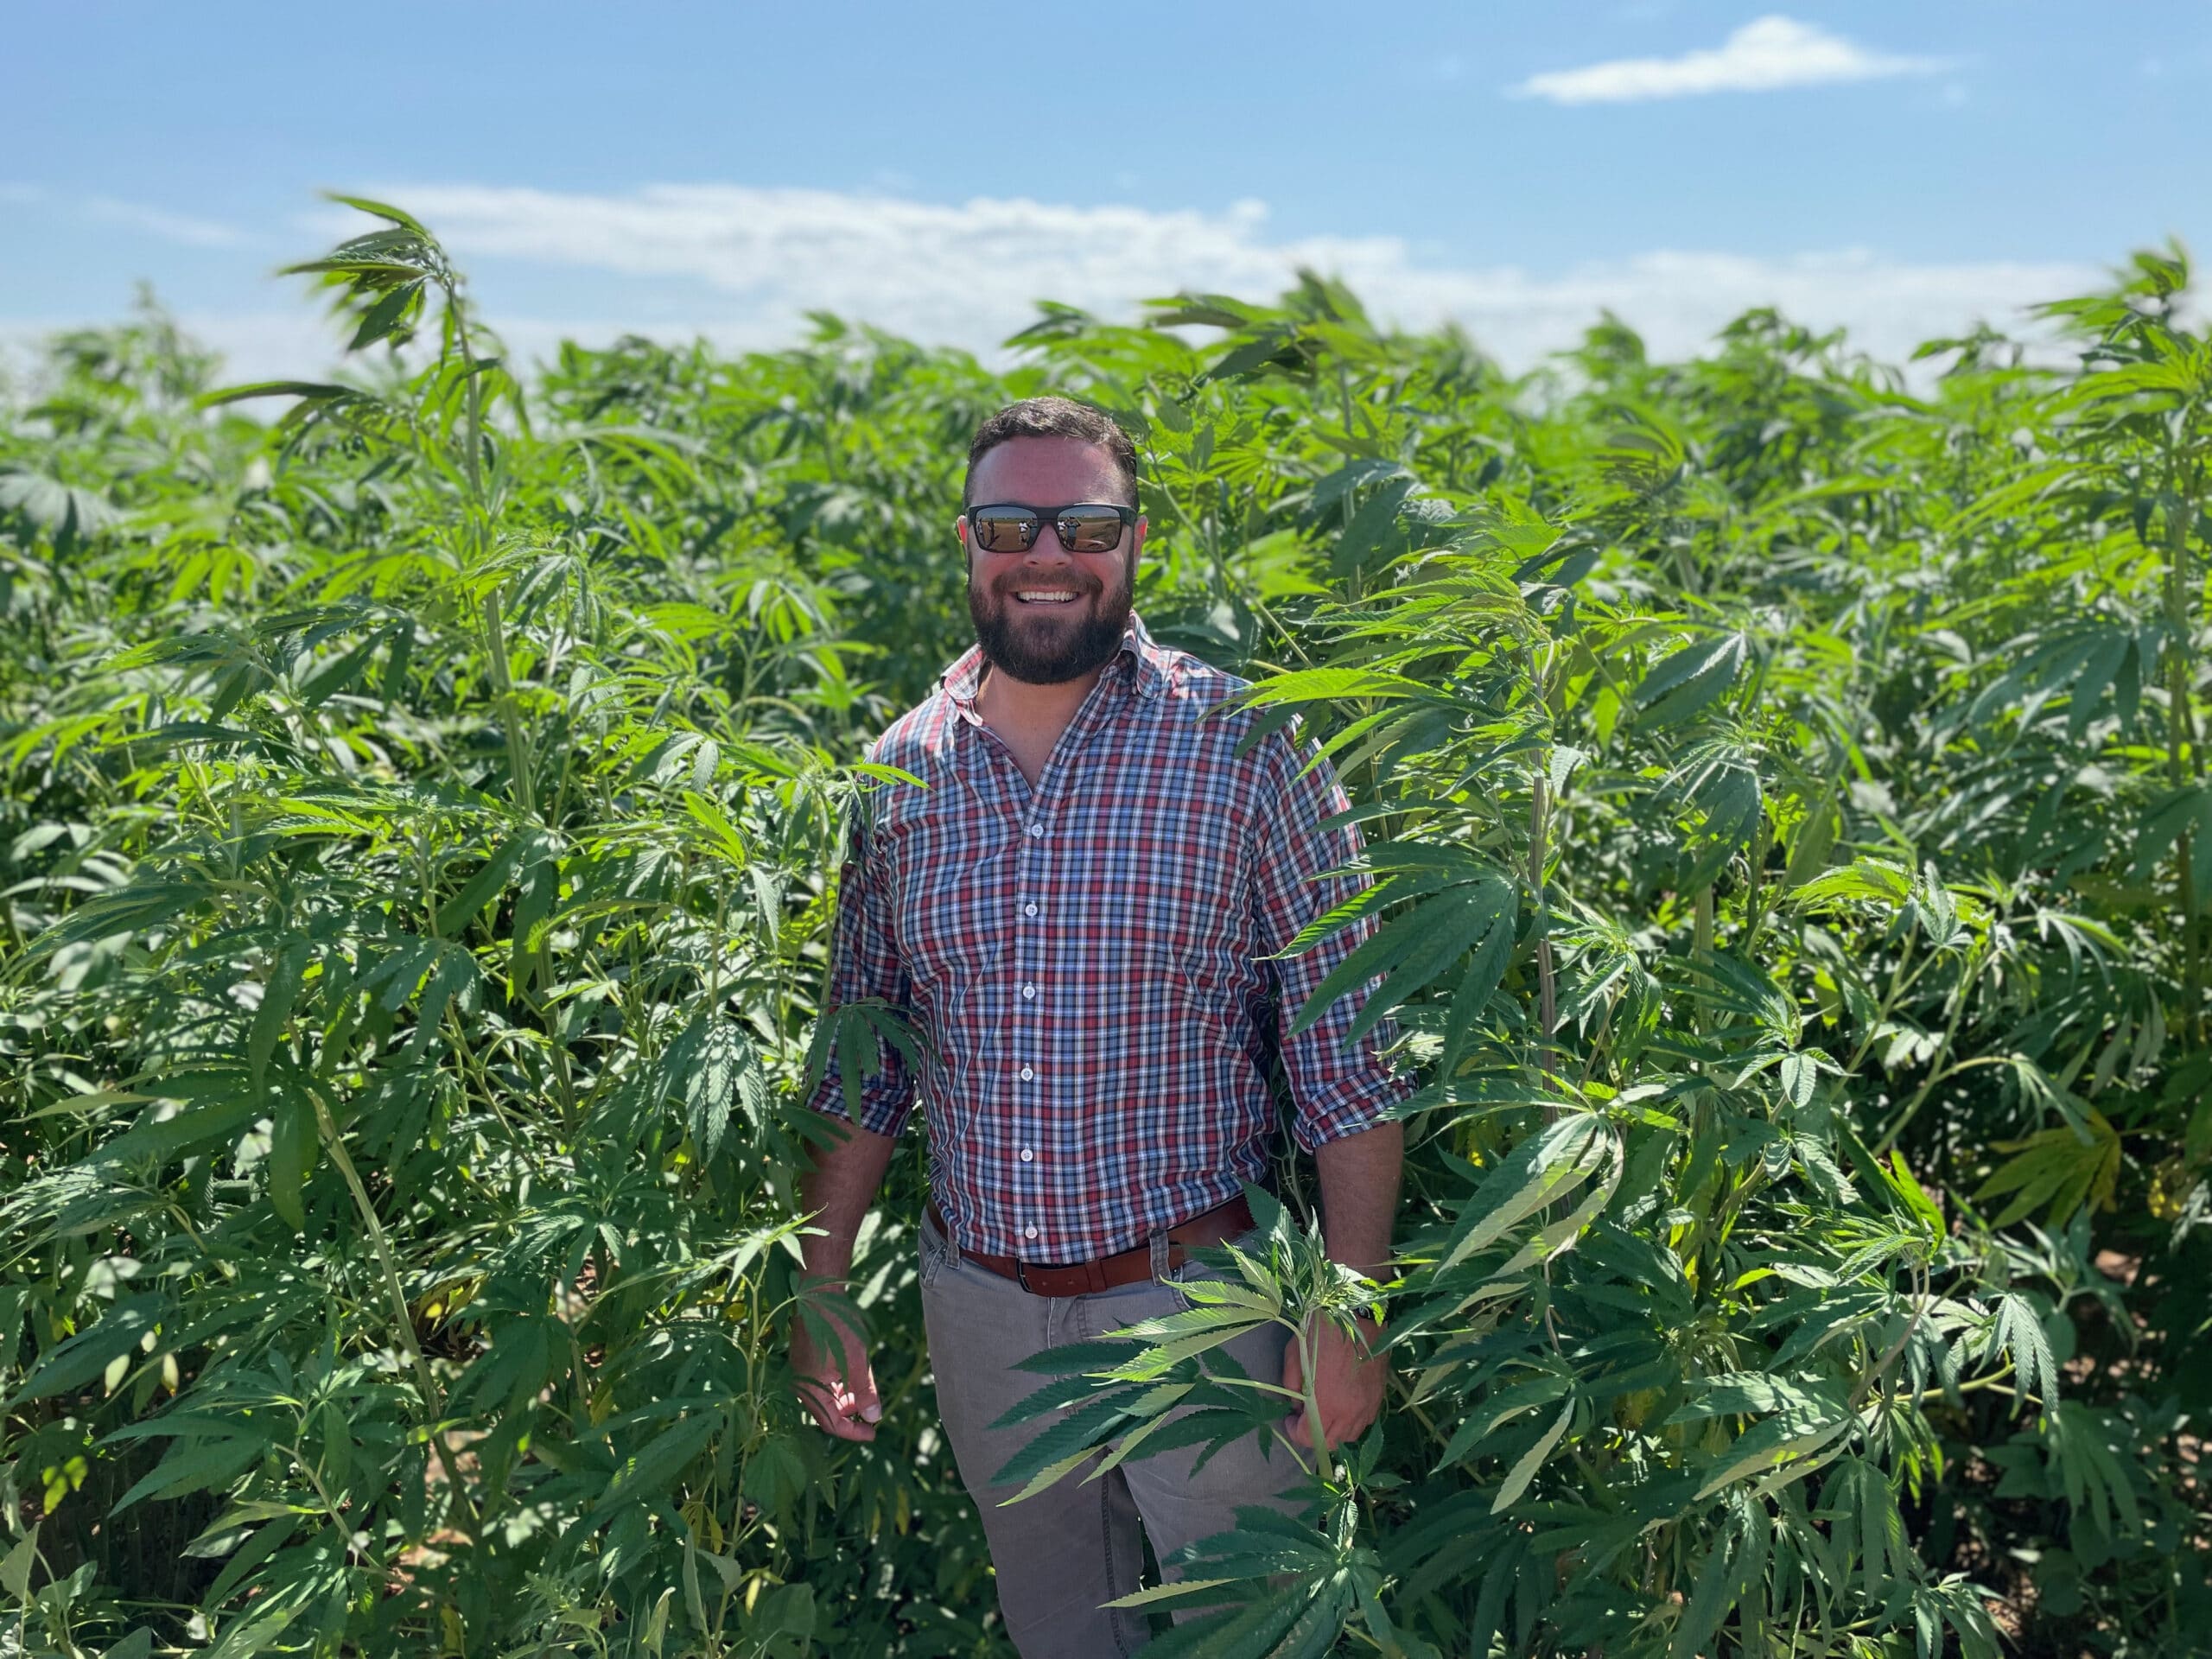 A smiling man standing in a large field of cannabis under a blue sky.